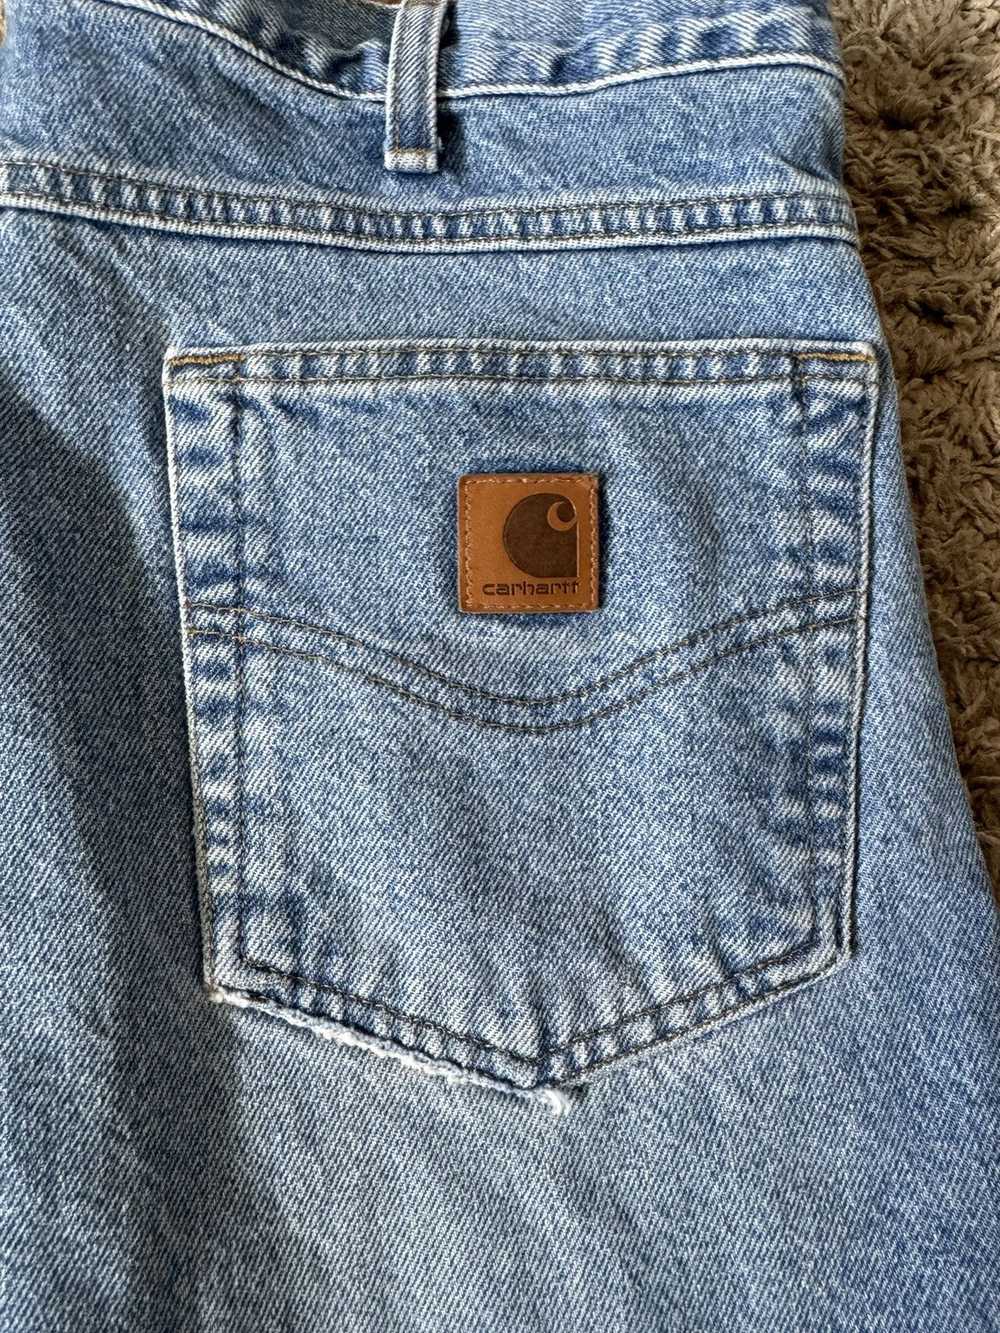 Carhartt carhartt relaxed fit - image 6